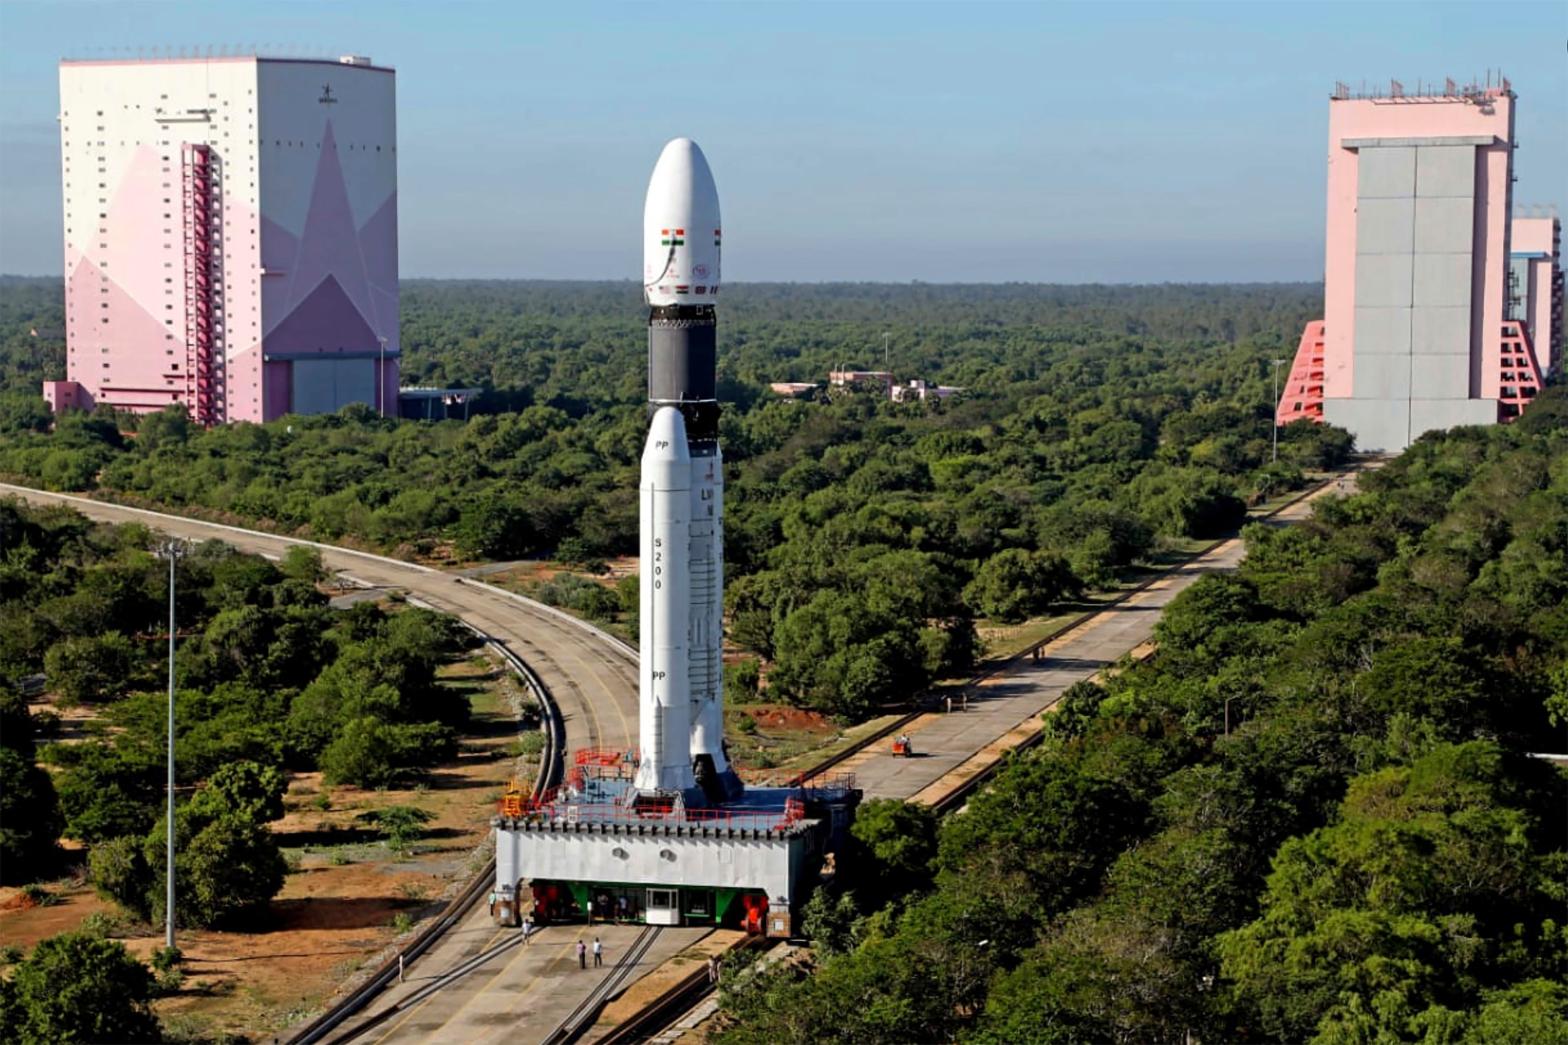 India previously launched 36 satellites into orbit in October 2022 using the Geosynchronous Satellite Launch Vehicle, two months after a first, failed attempt to launch satellites with the Small Satellite Launch Vehicle. (Image: Uncredited, AP)